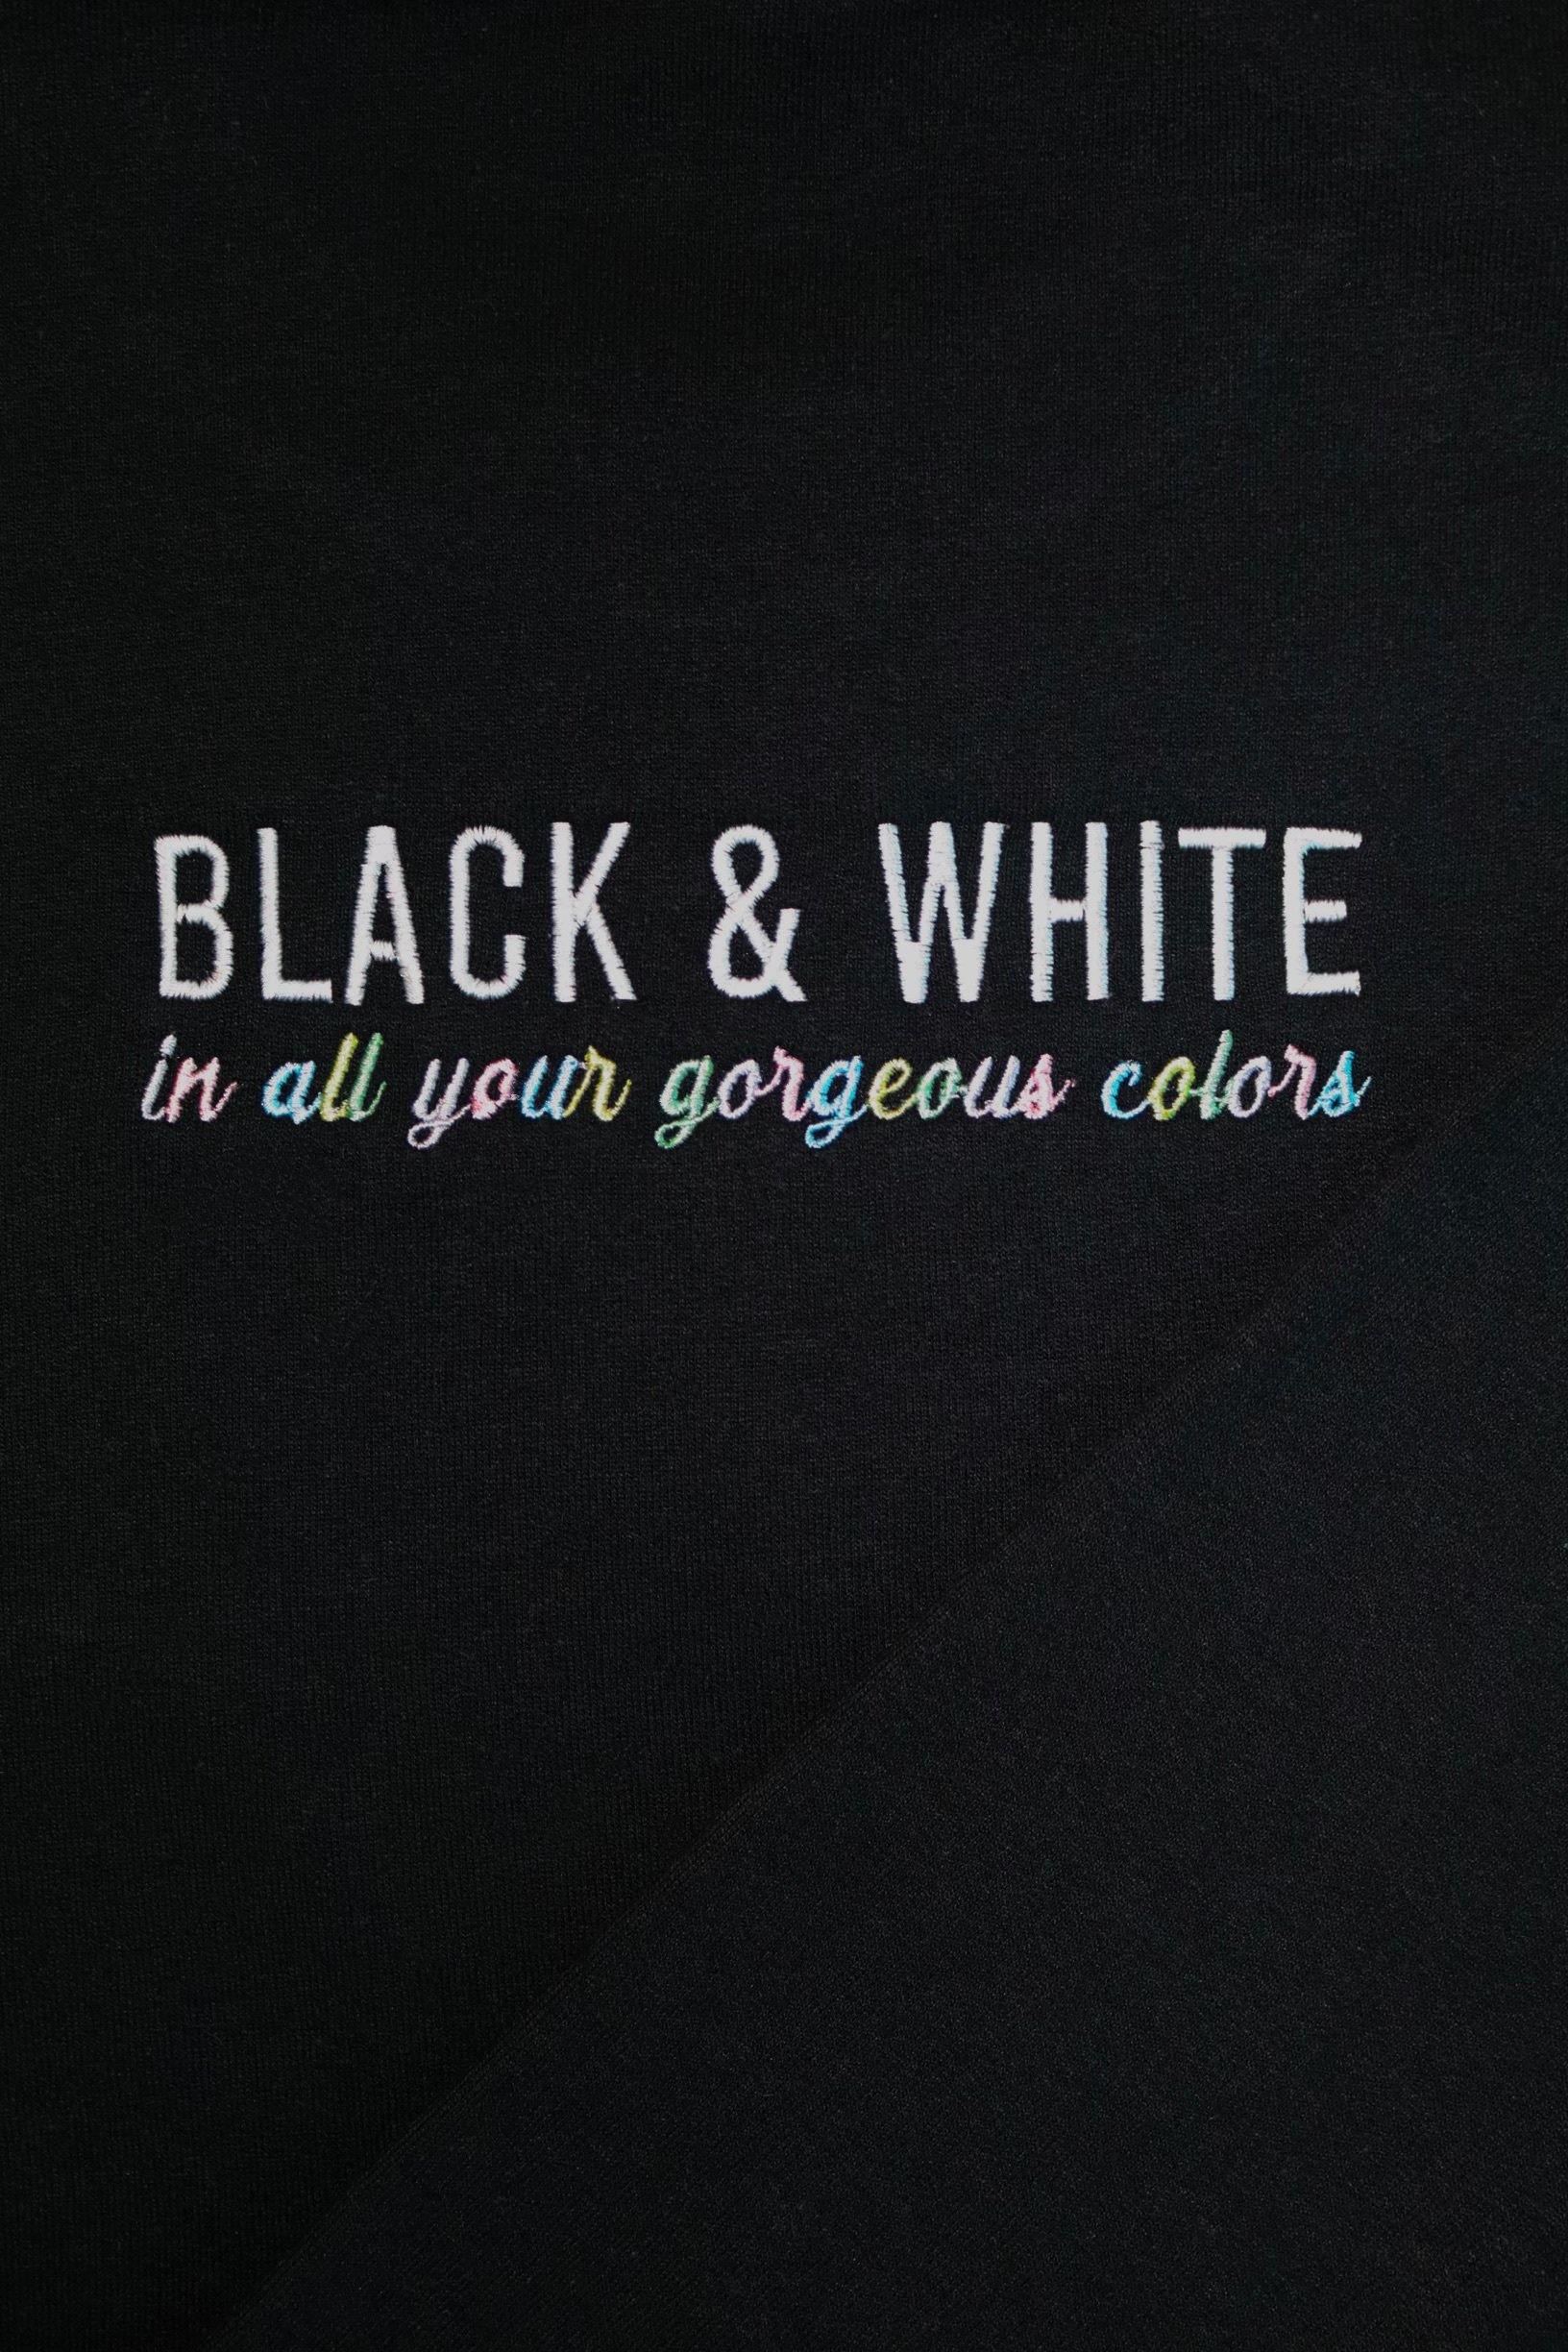 Niall Horan Black and White in Color Sweatshirt